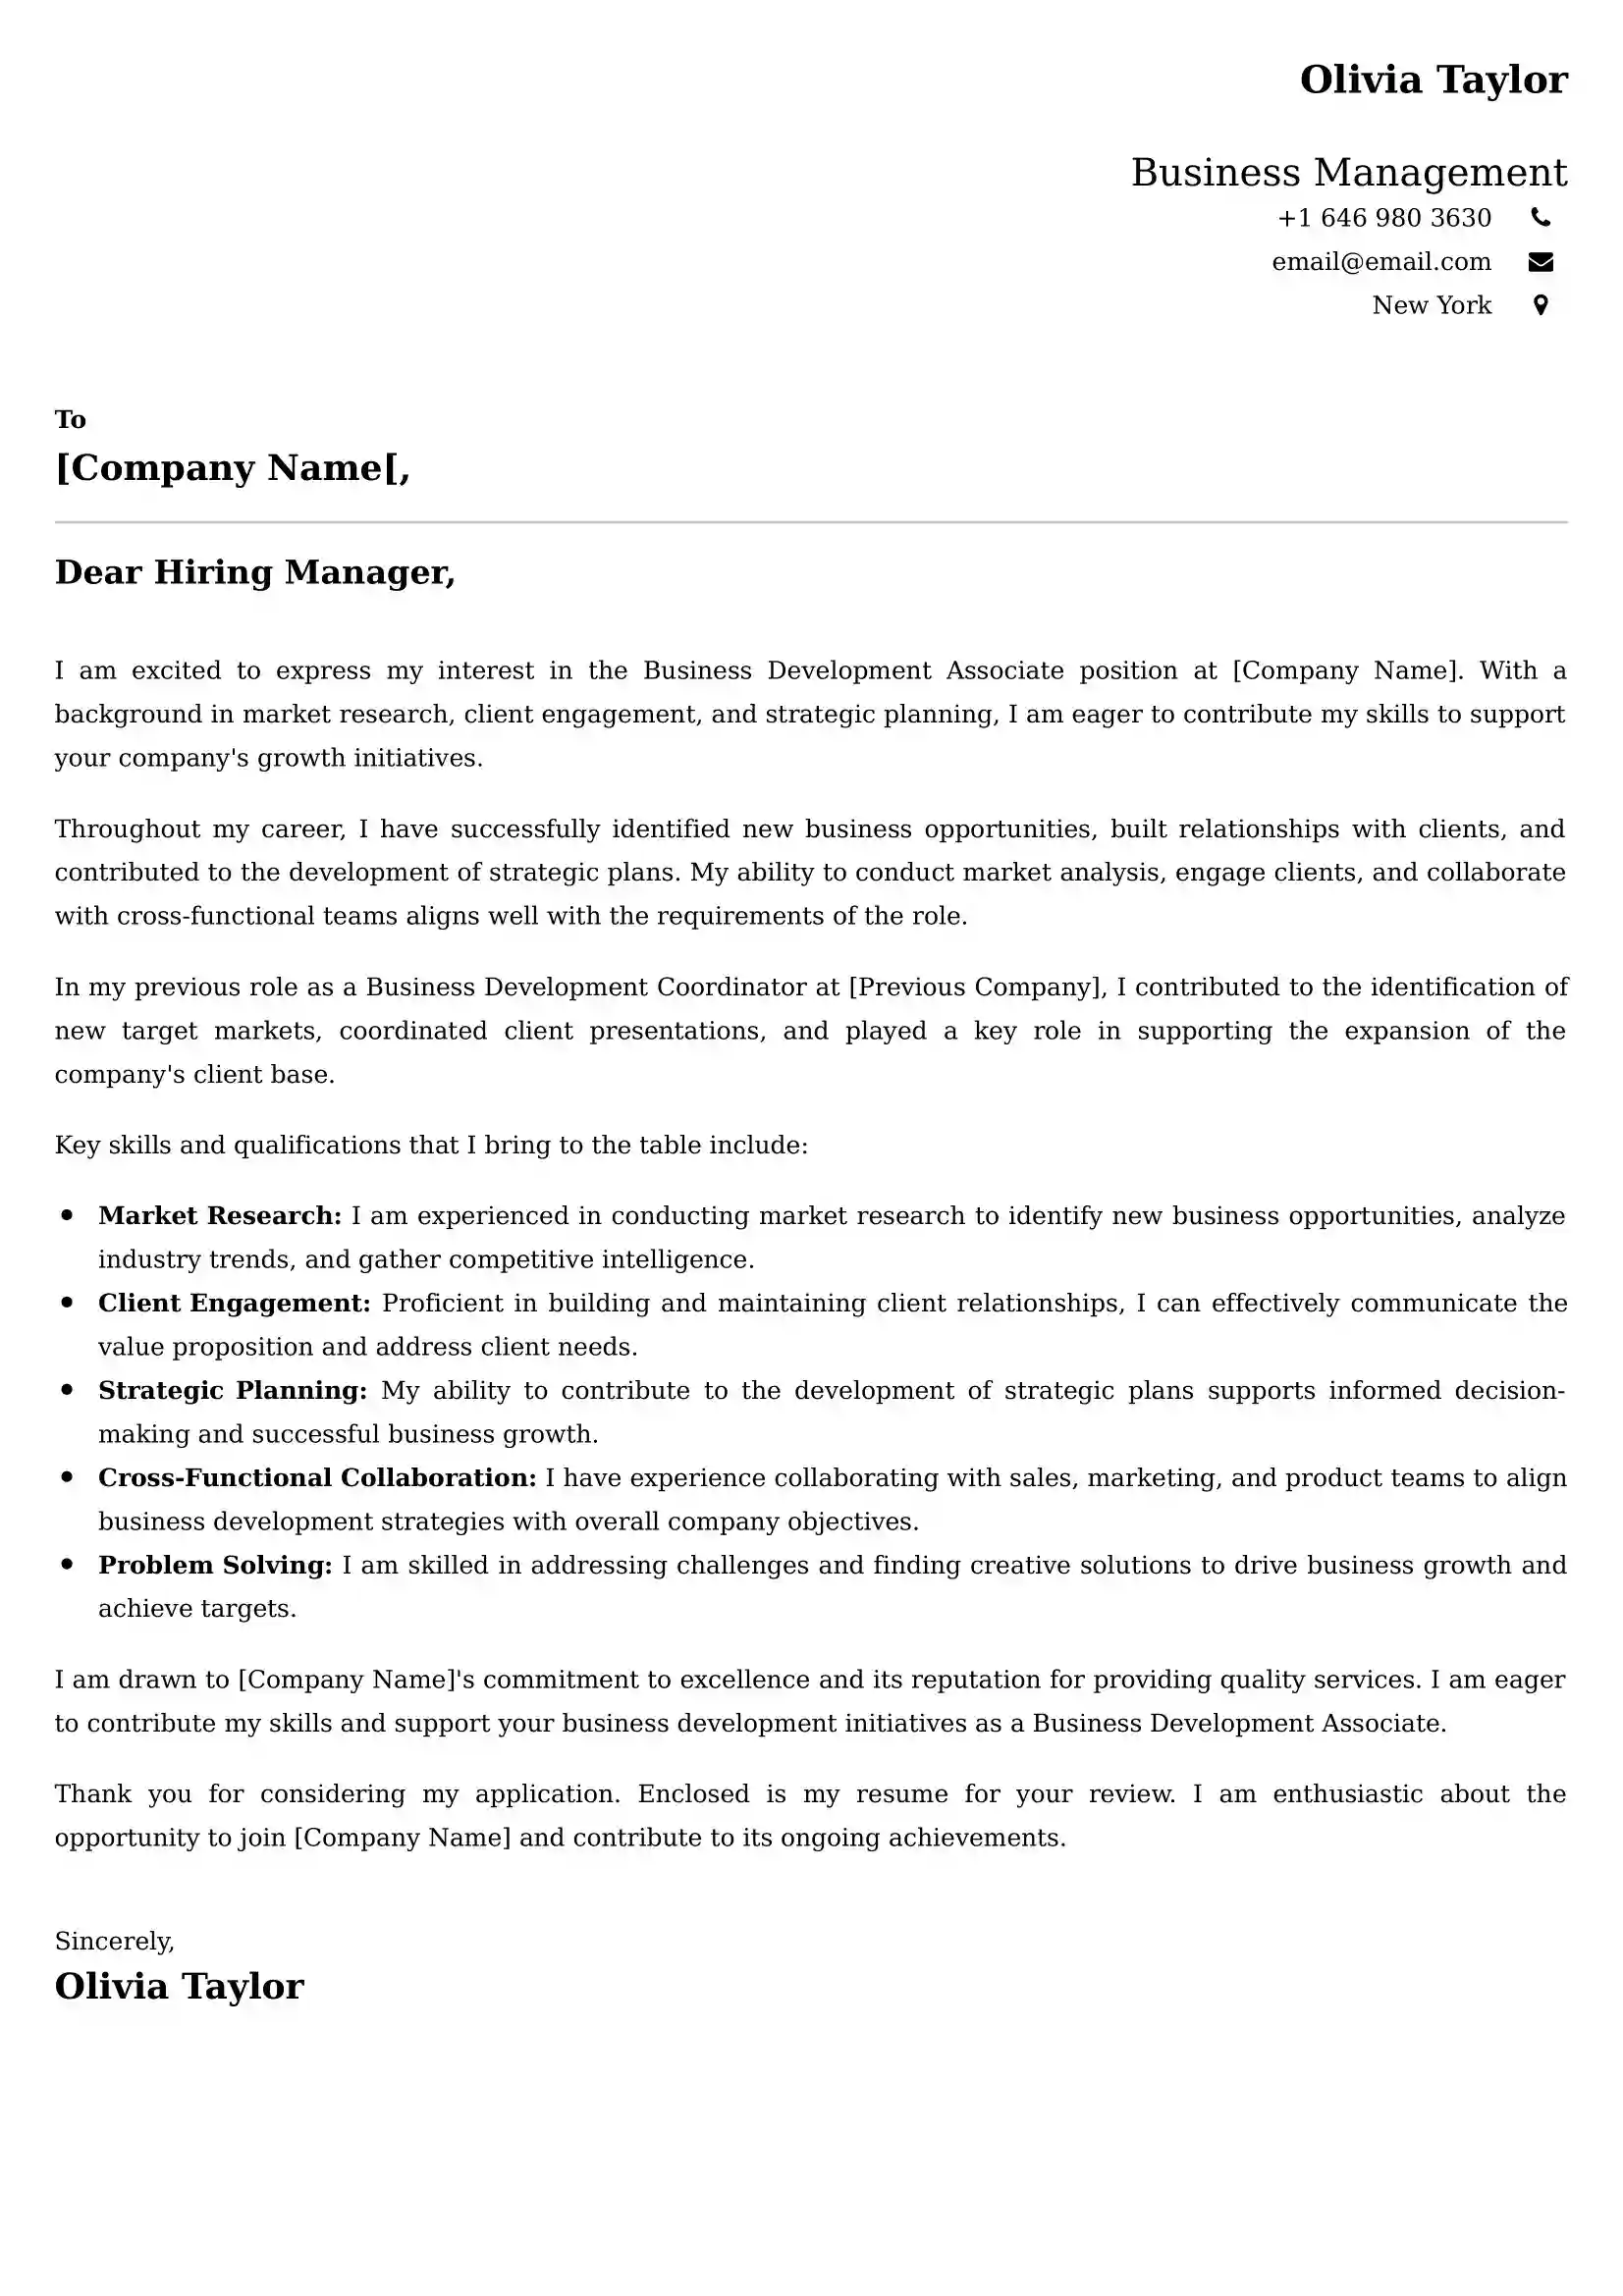 Business Operations Cover Letter Samples | 45+ ATS-Optimized Format and Guide